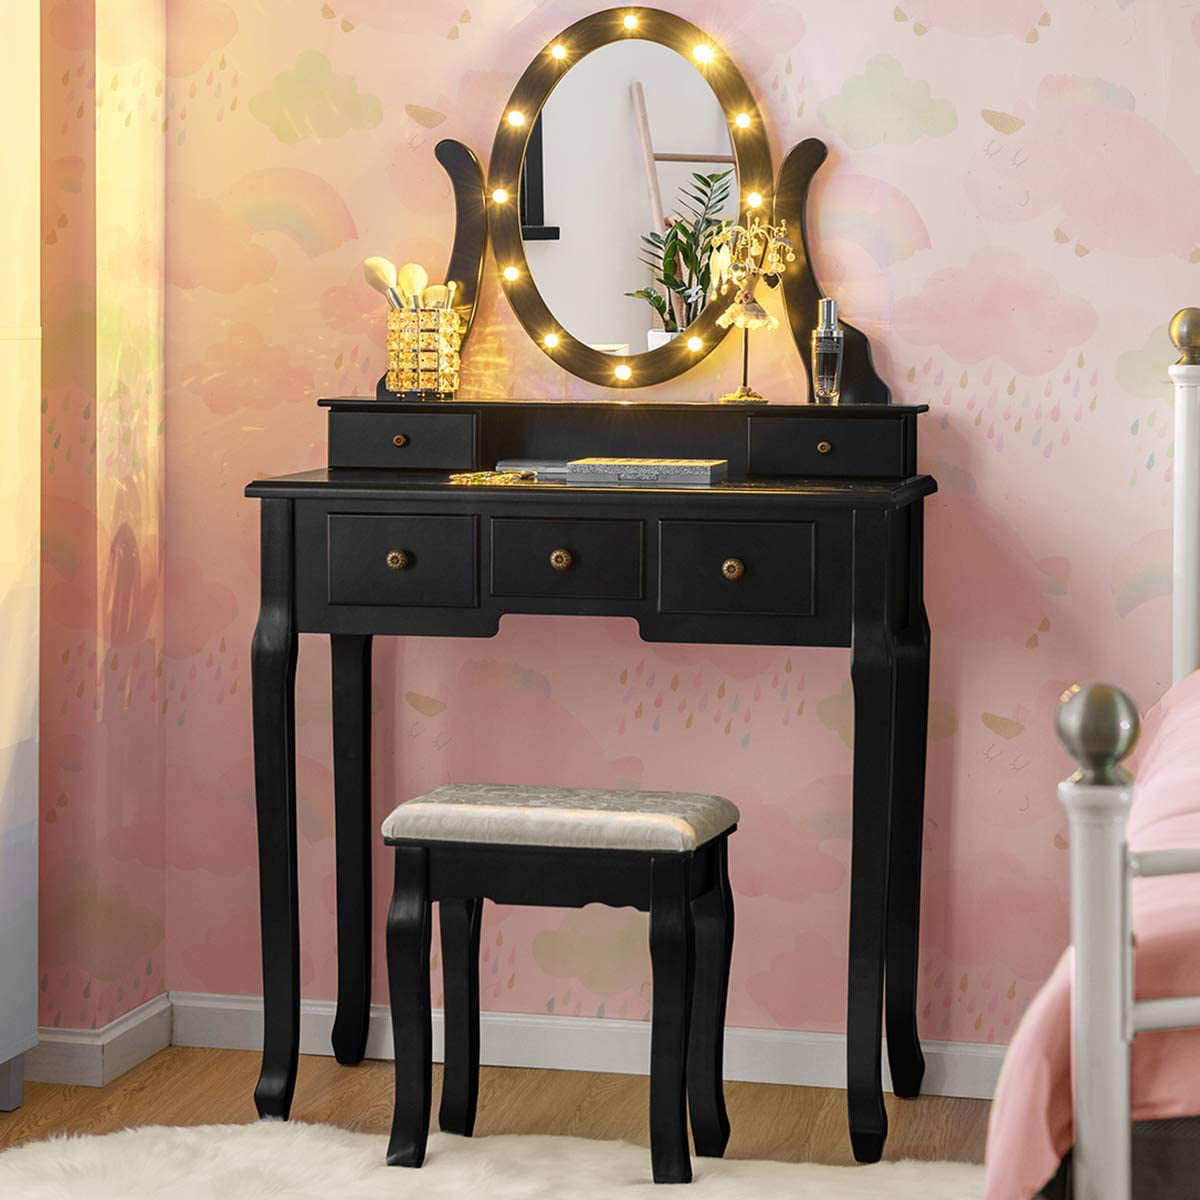 Details about   Black Vanity Dressing Table Set With Mirror Stool 5 Drawers Makeup Desk Bedroom 